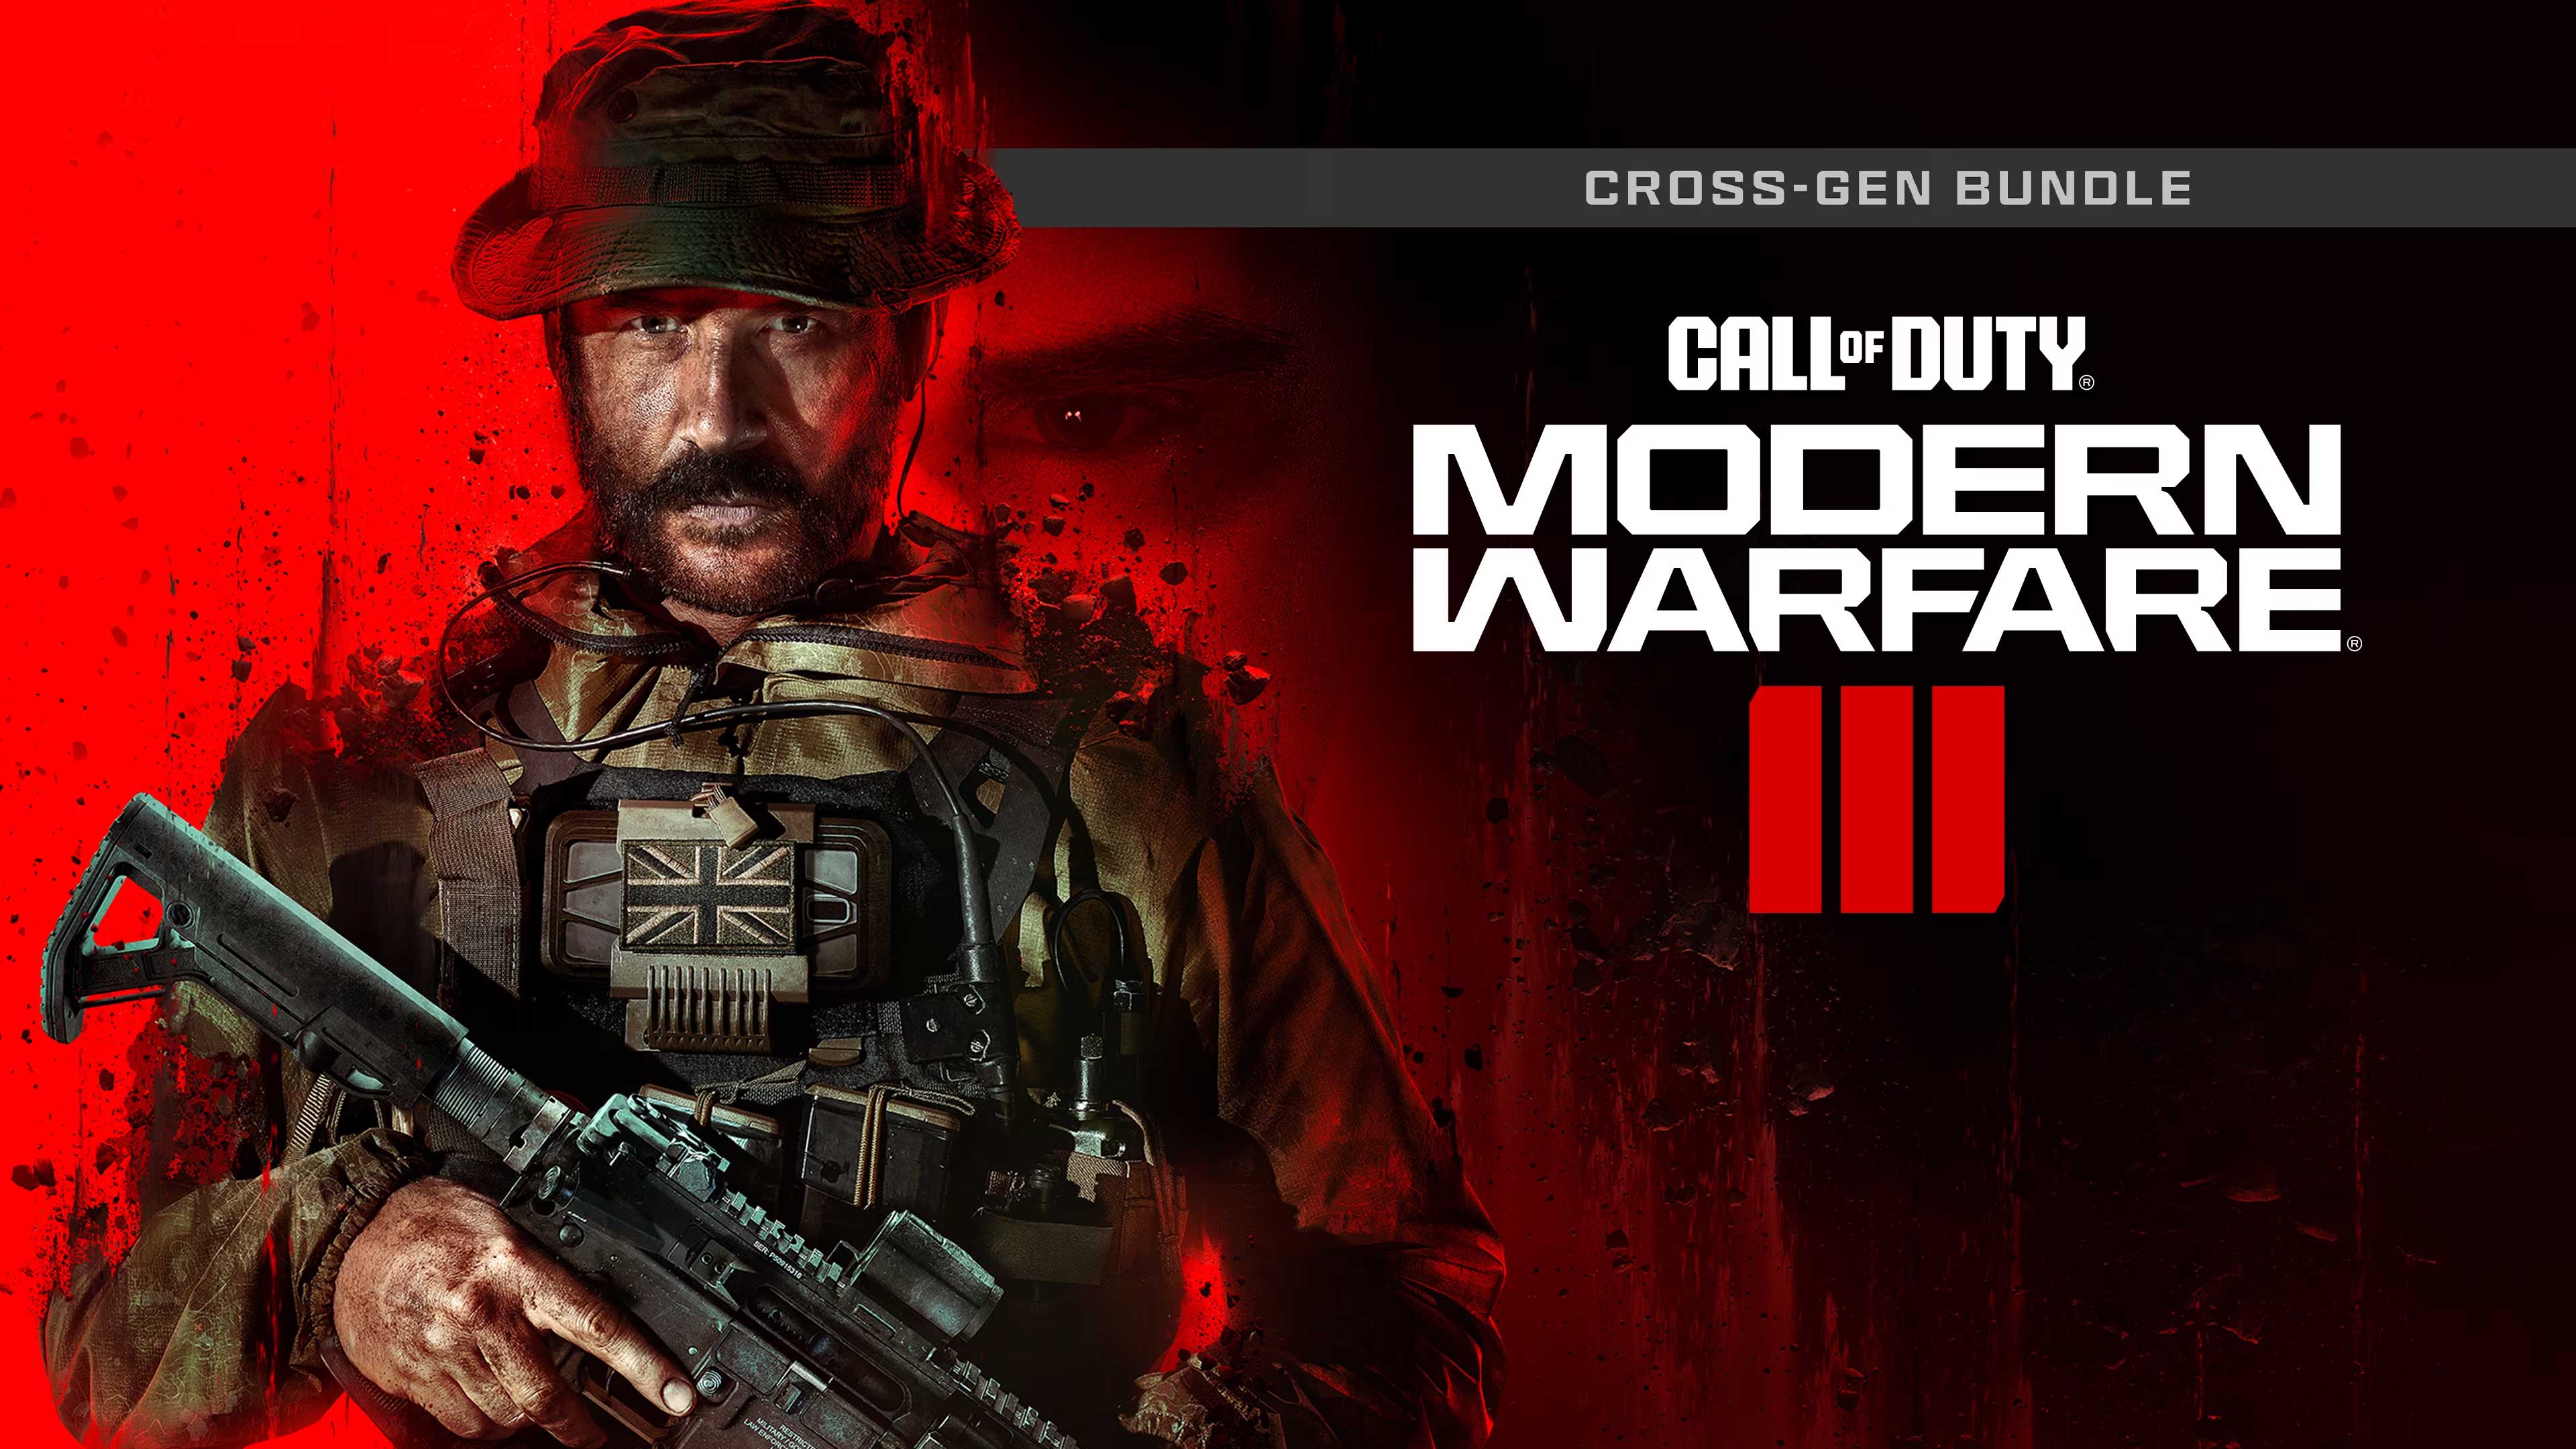 Call of Duty: Modern Warfare III - Cross-Gen Bundle, The Old Couldron, theoldcouldron.com